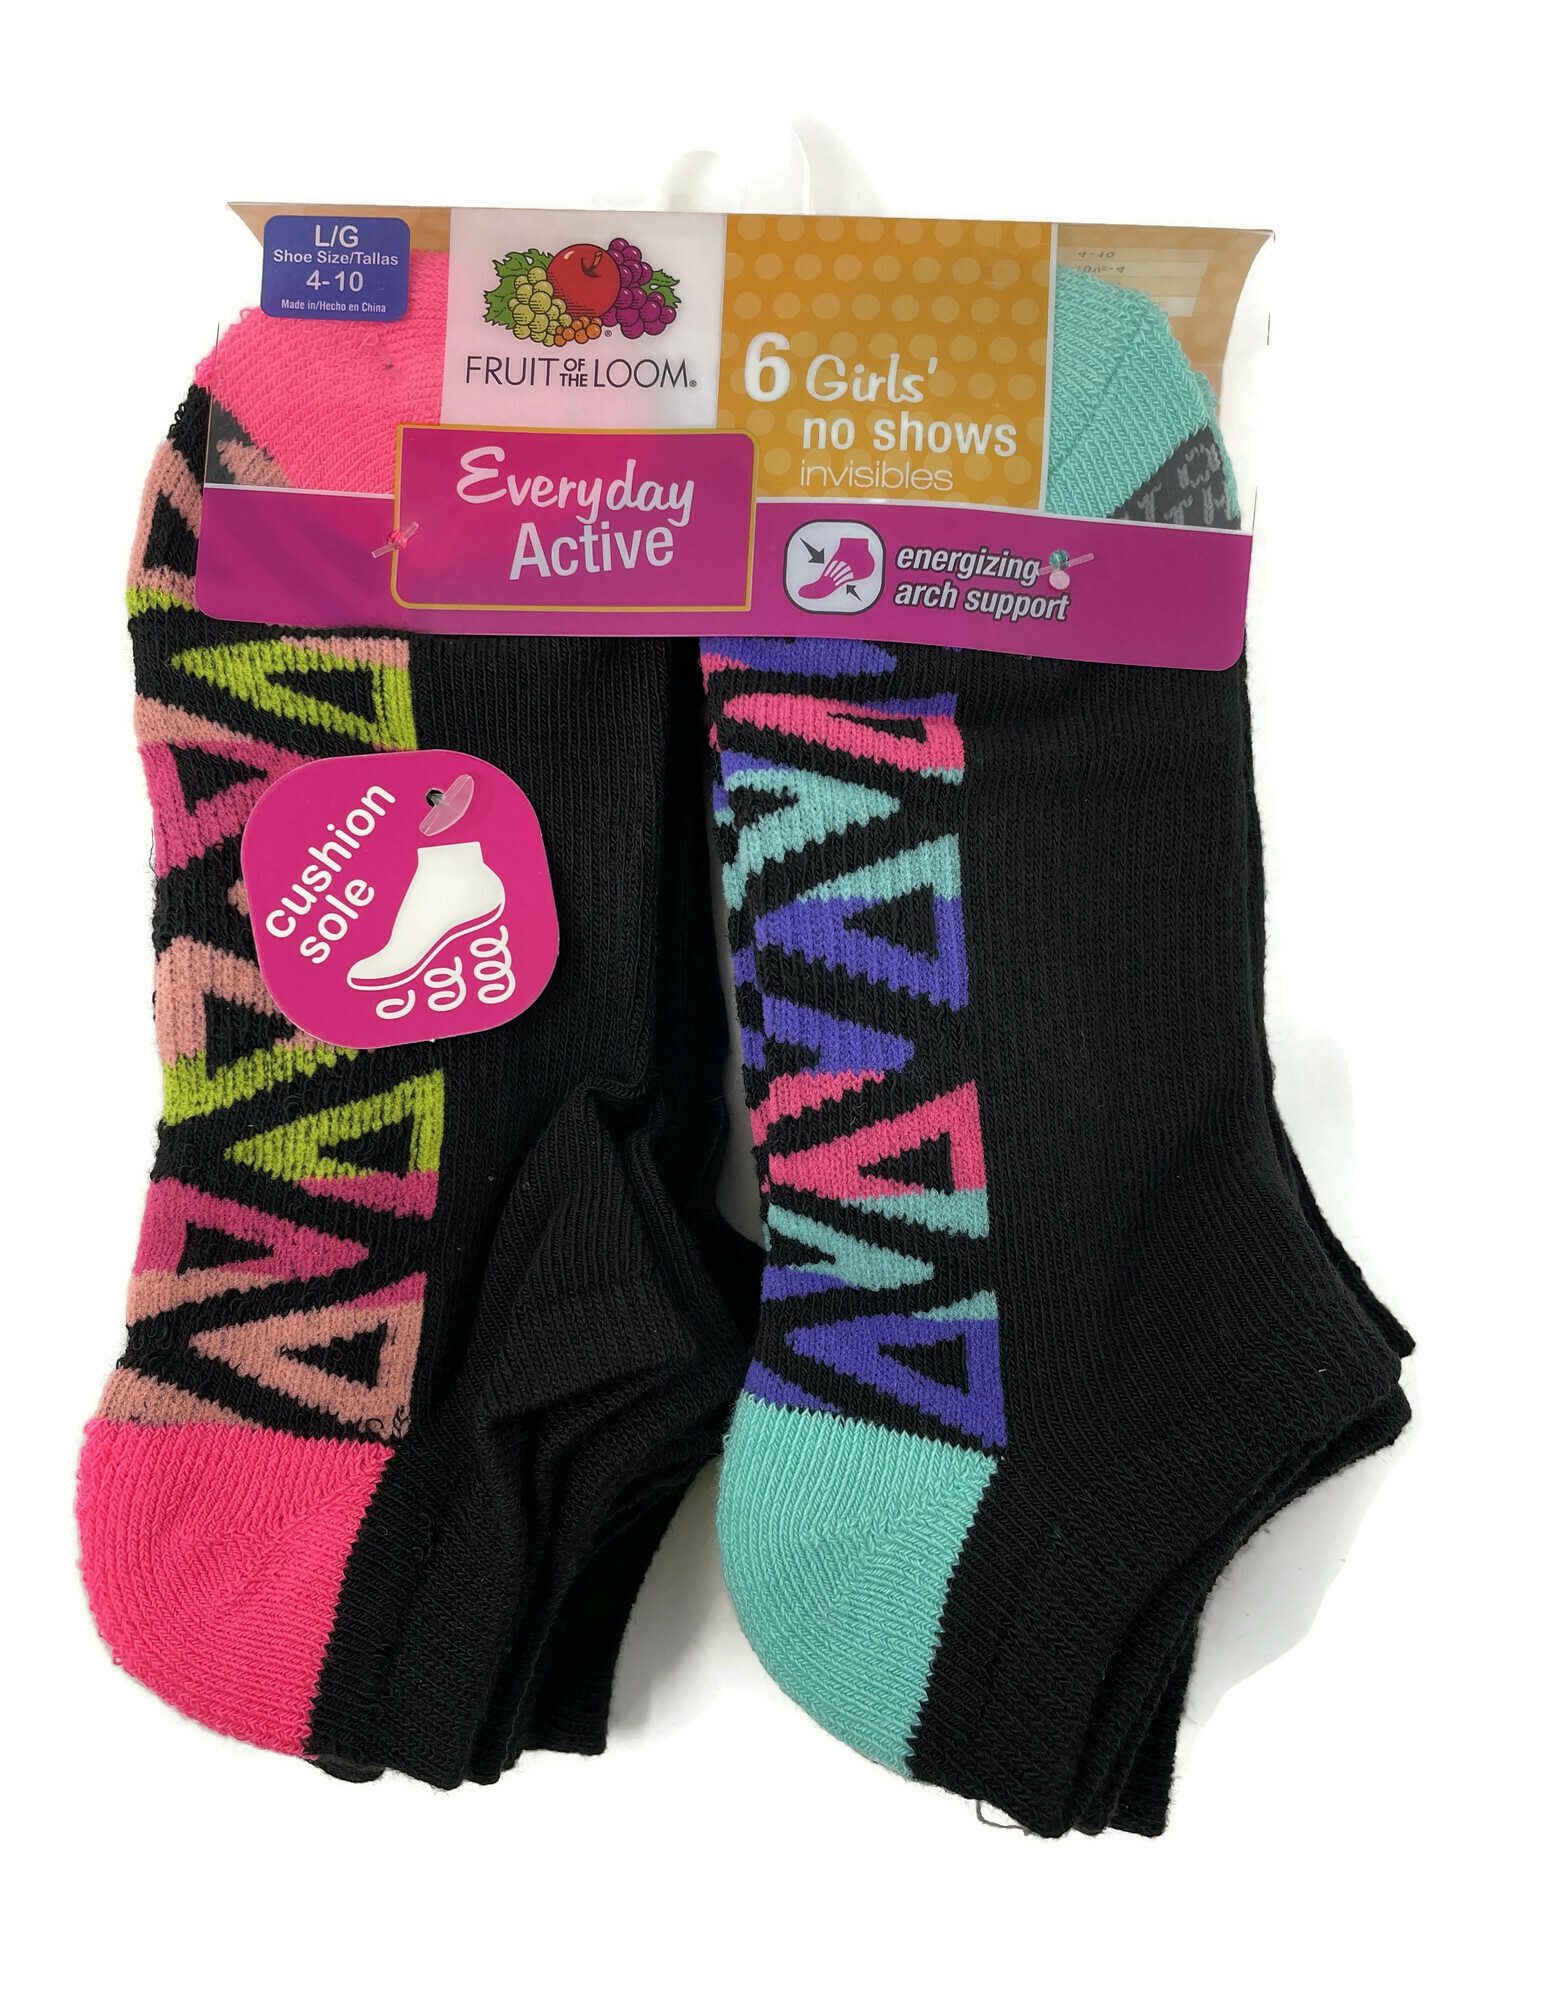 Fruit Of The Loom Girls 6 Pack Everyday Active No Show Socks